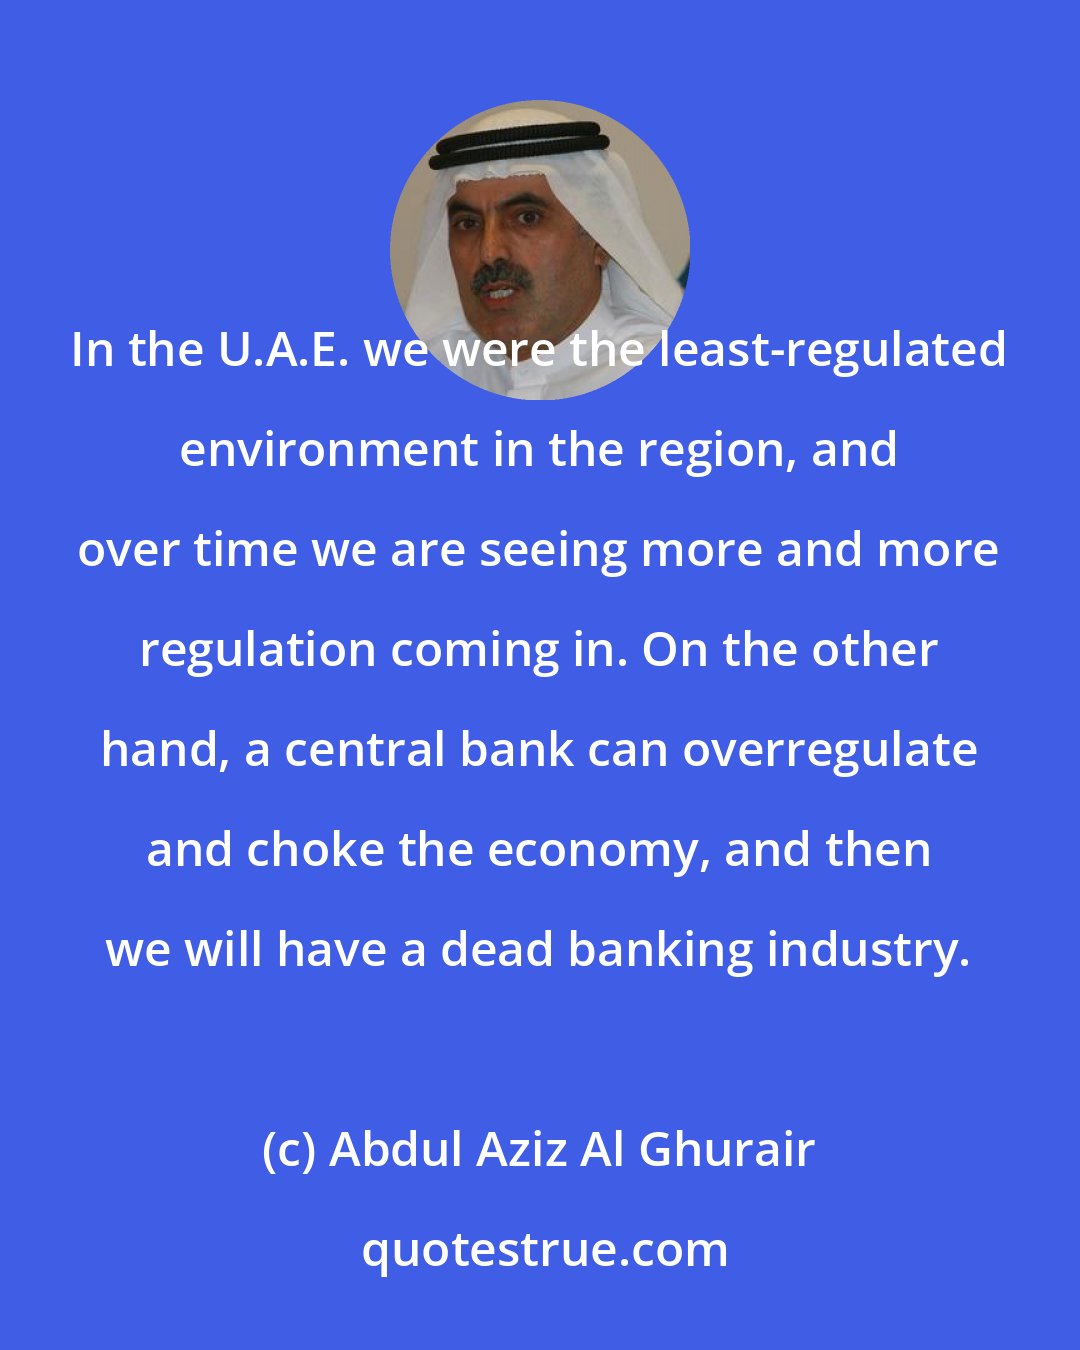 Abdul Aziz Al Ghurair: In the U.A.E. we were the least-regulated environment in the region, and over time we are seeing more and more regulation coming in. On the other hand, a central bank can overregulate and choke the economy, and then we will have a dead banking industry.